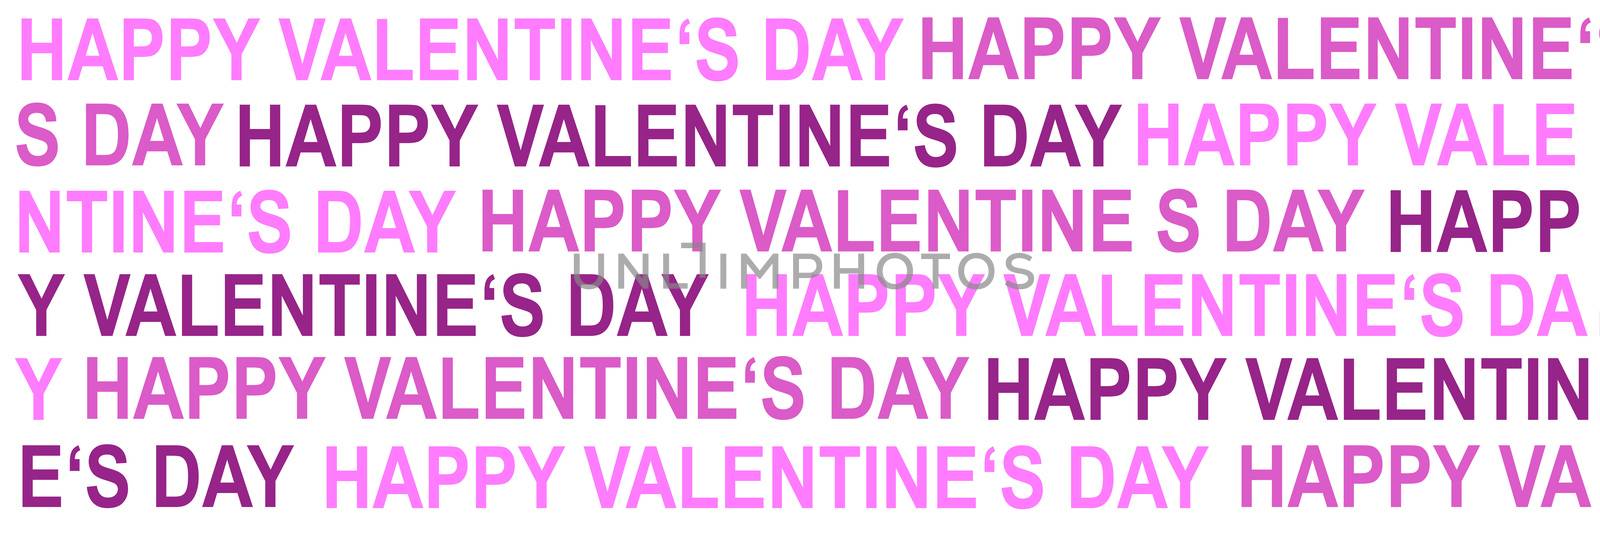 Panorama card with text Happy Valentine's Day in different colors